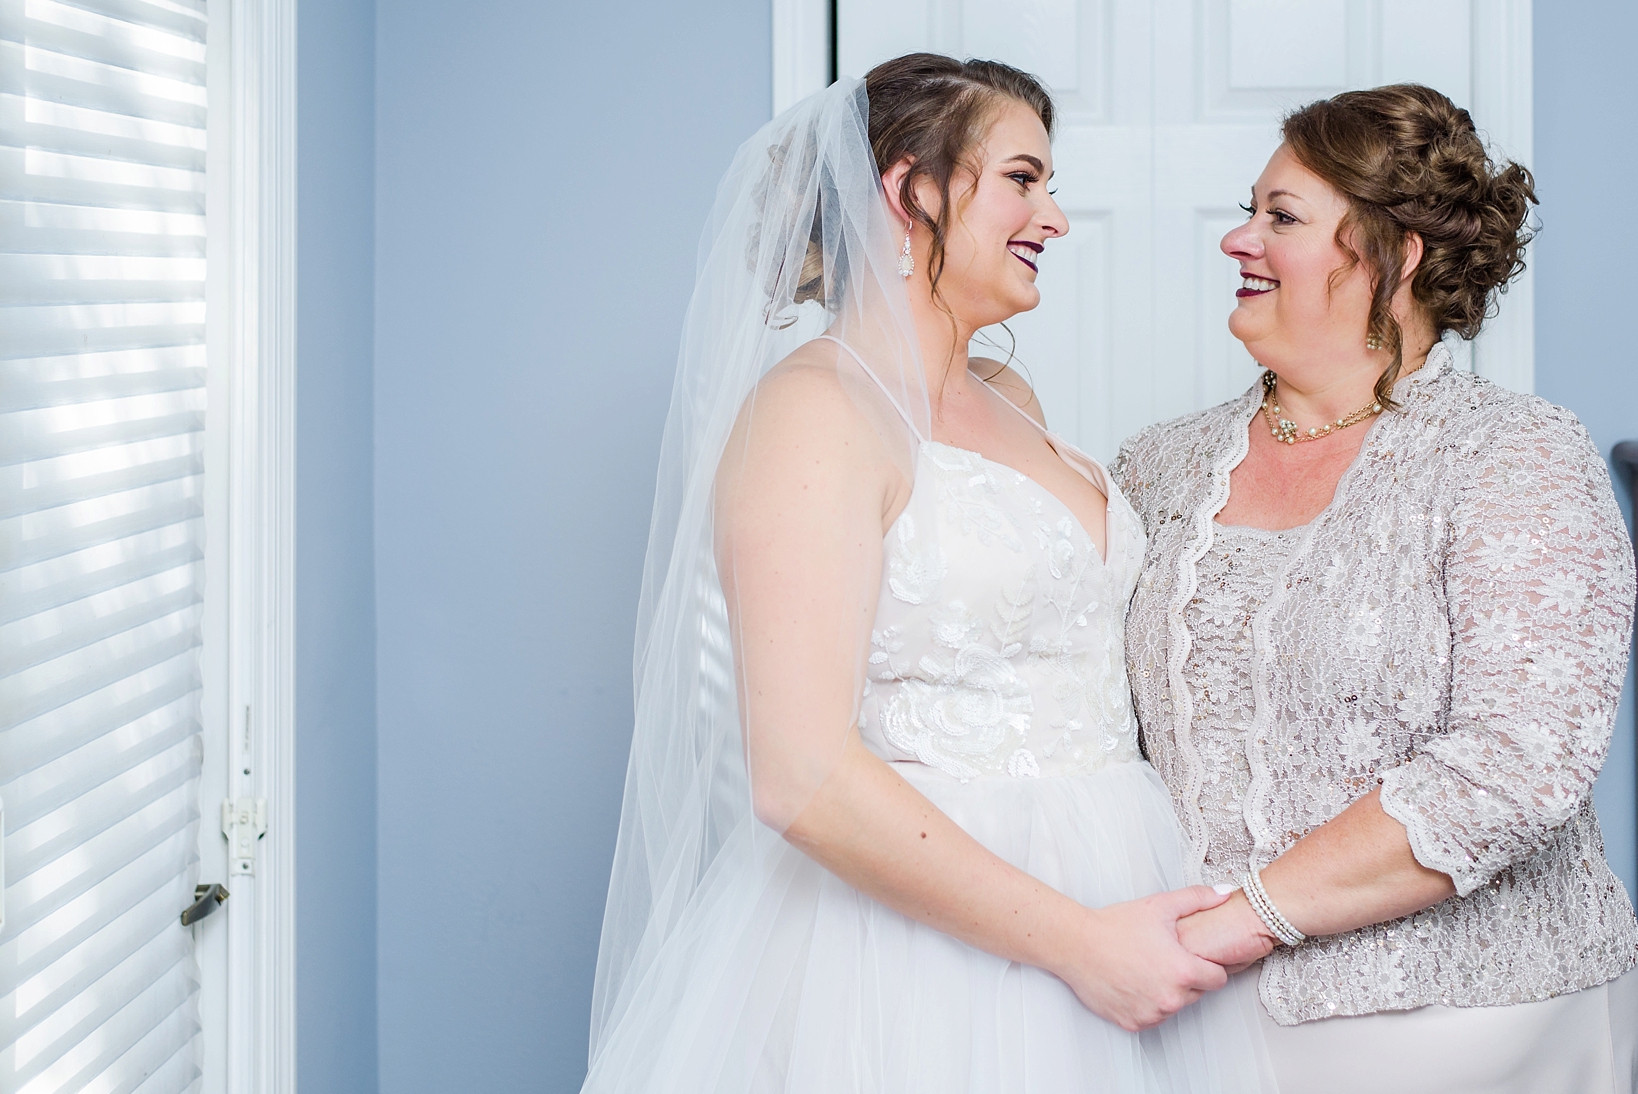 Mother and Daughter on the wedding day smiling at each other